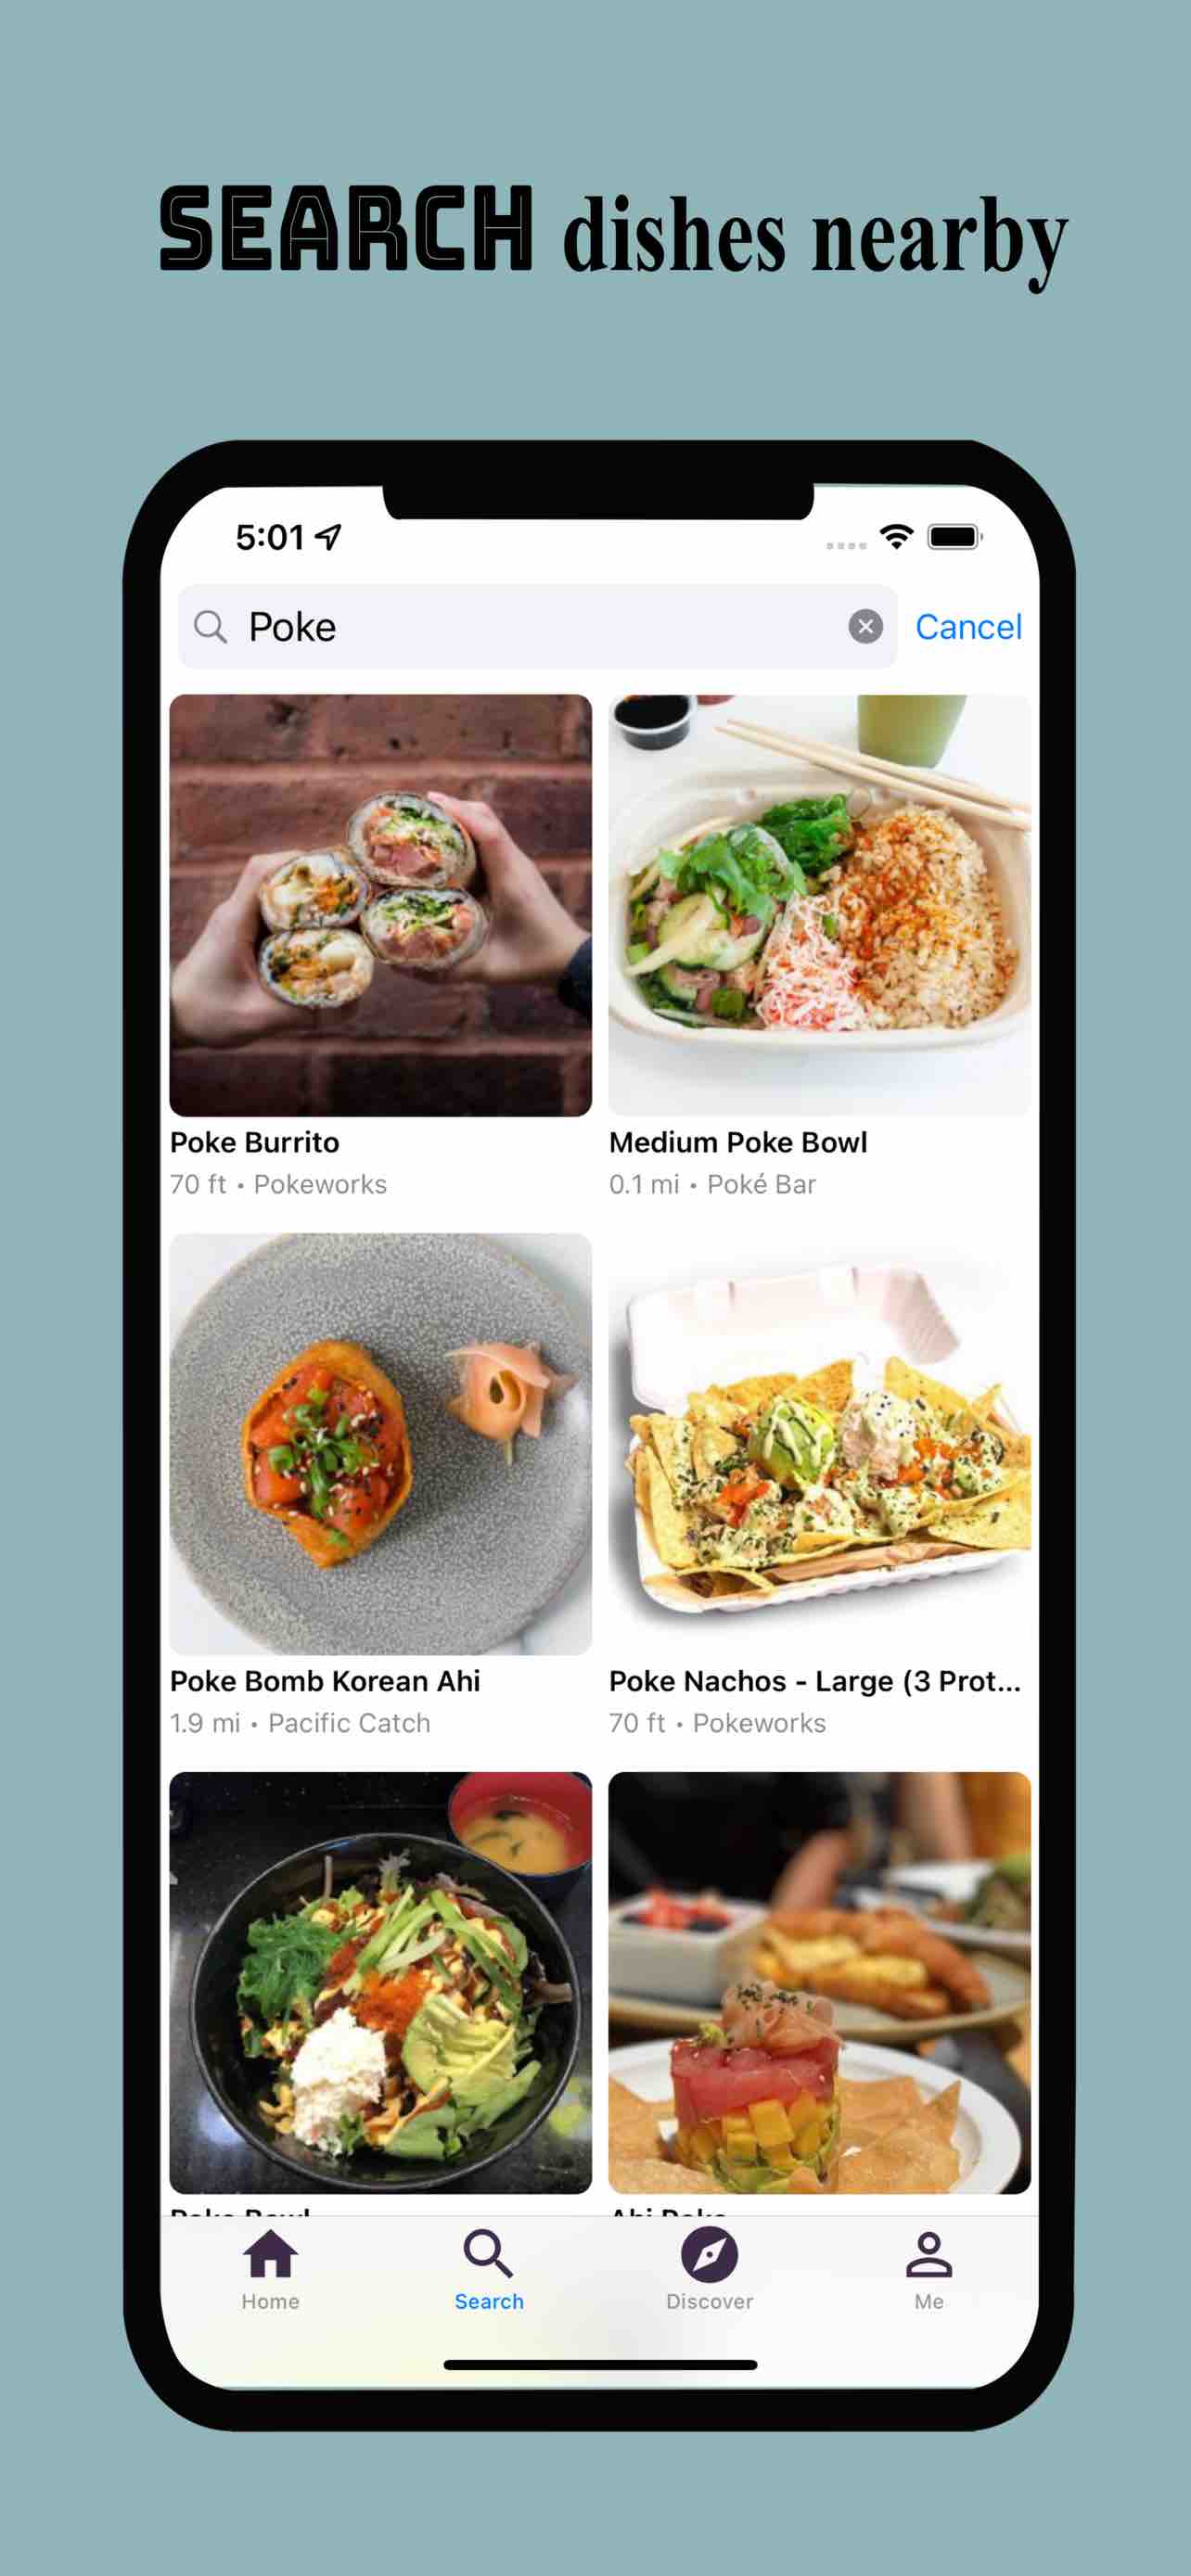 FoodSpot search for dishes, restaurants, cuisines, ingredients